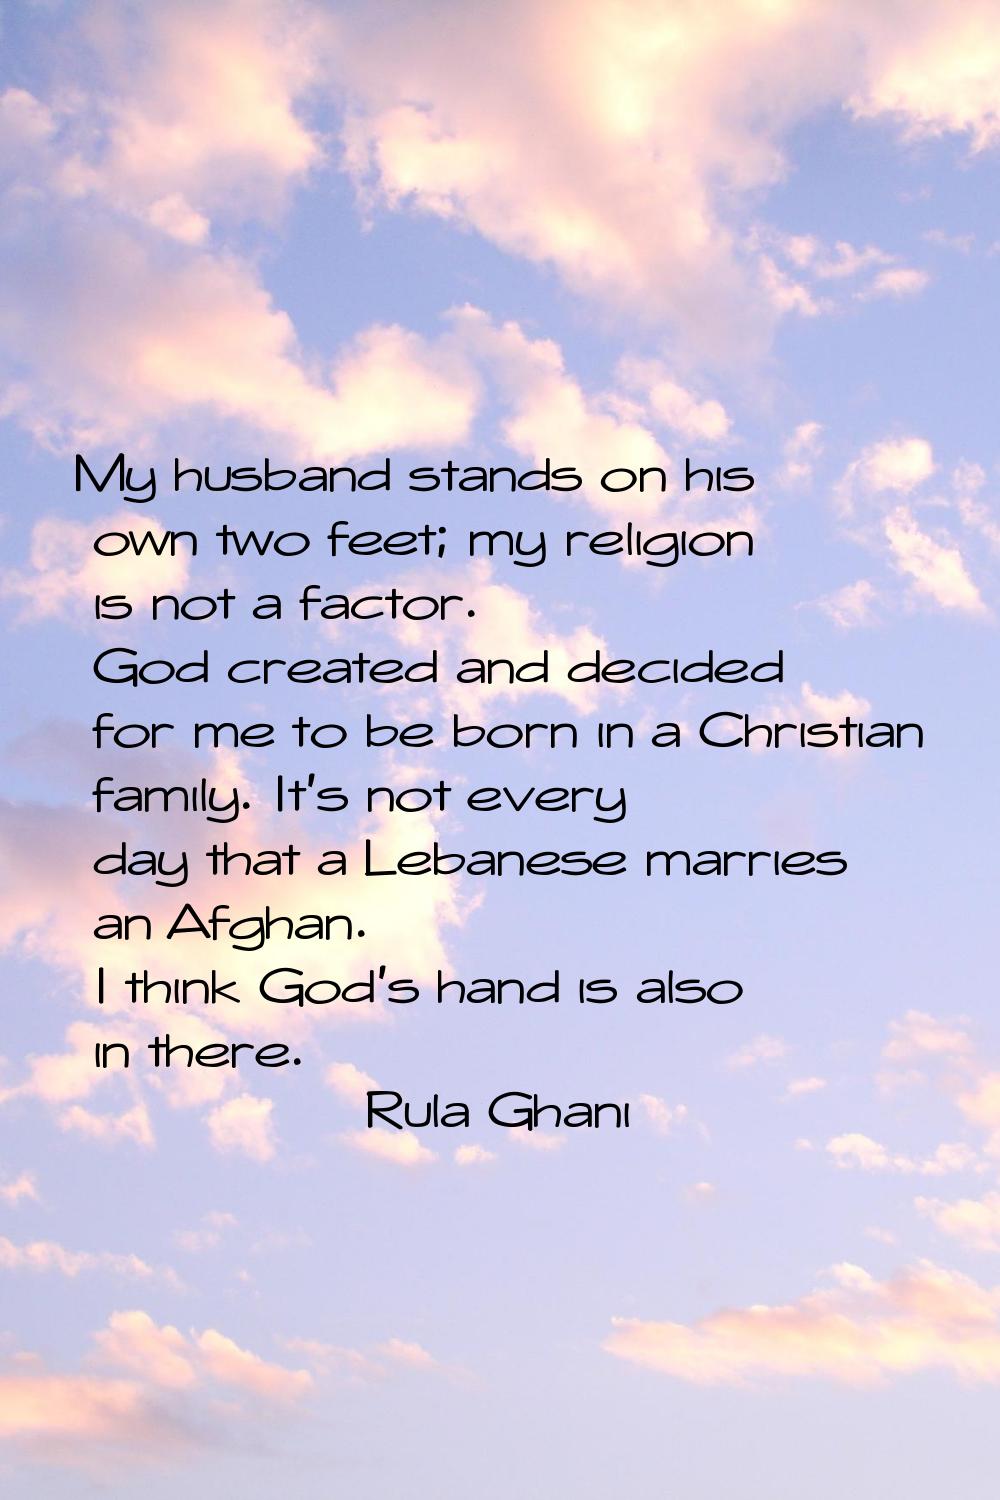 My husband stands on his own two feet; my religion is not a factor. God created and decided for me 